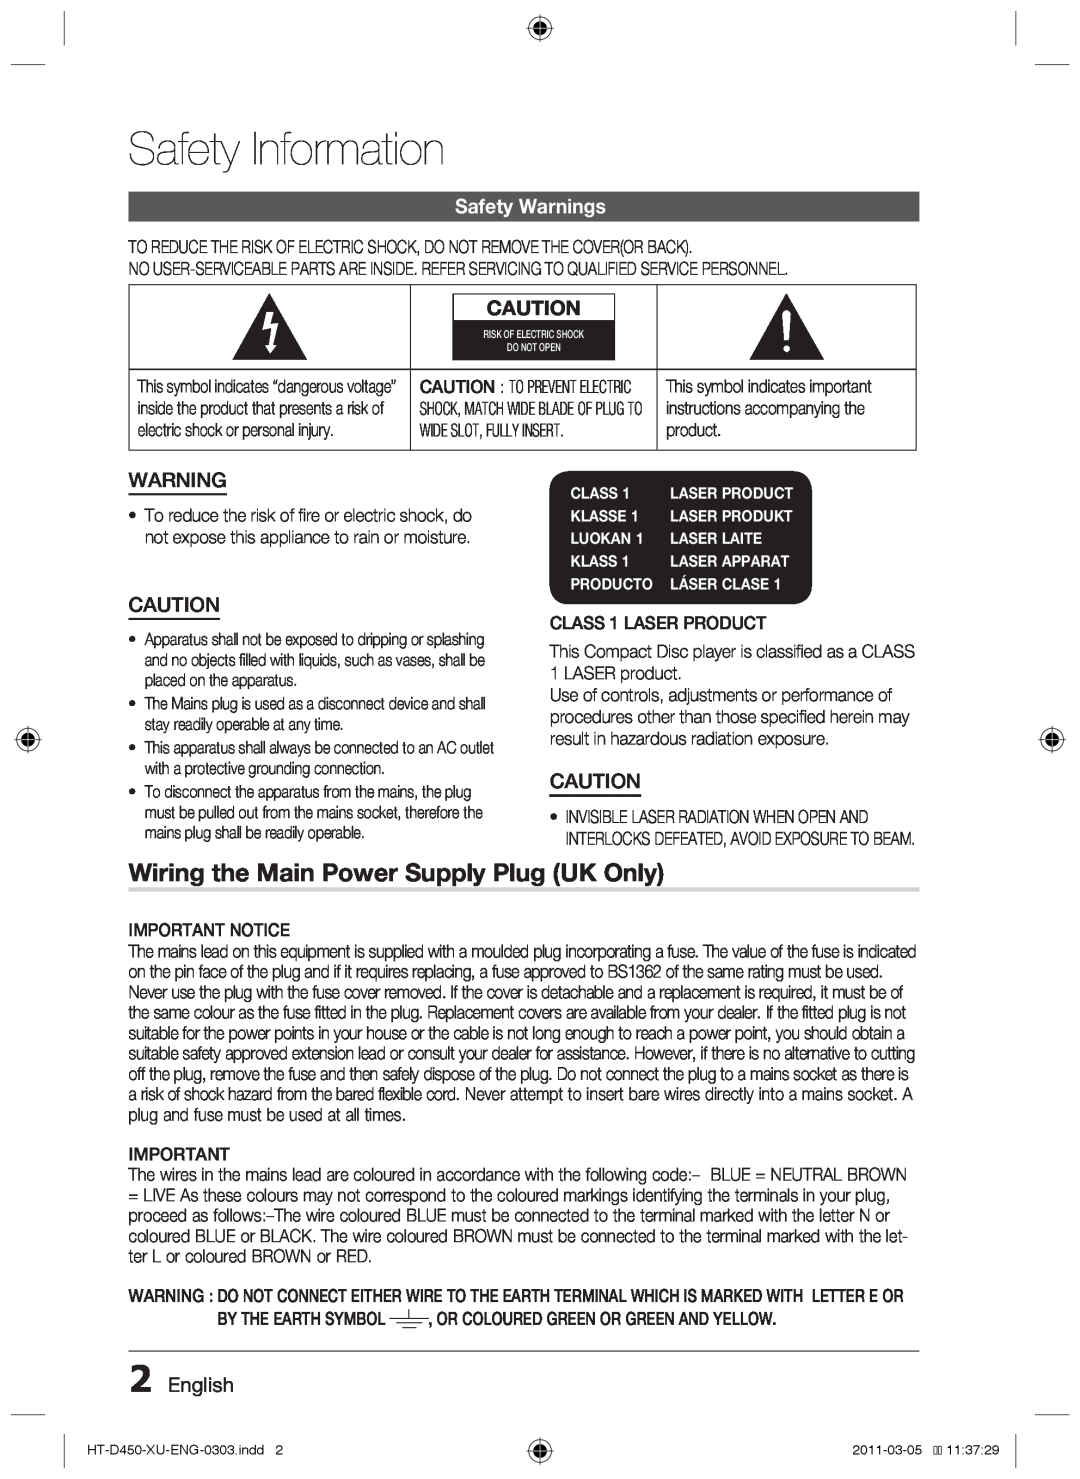 Samsung HT-D453, HT-D450, HT-D455 Safety Information, Wiring the Main Power Supply Plug UK Only, Safety Warnings, English 